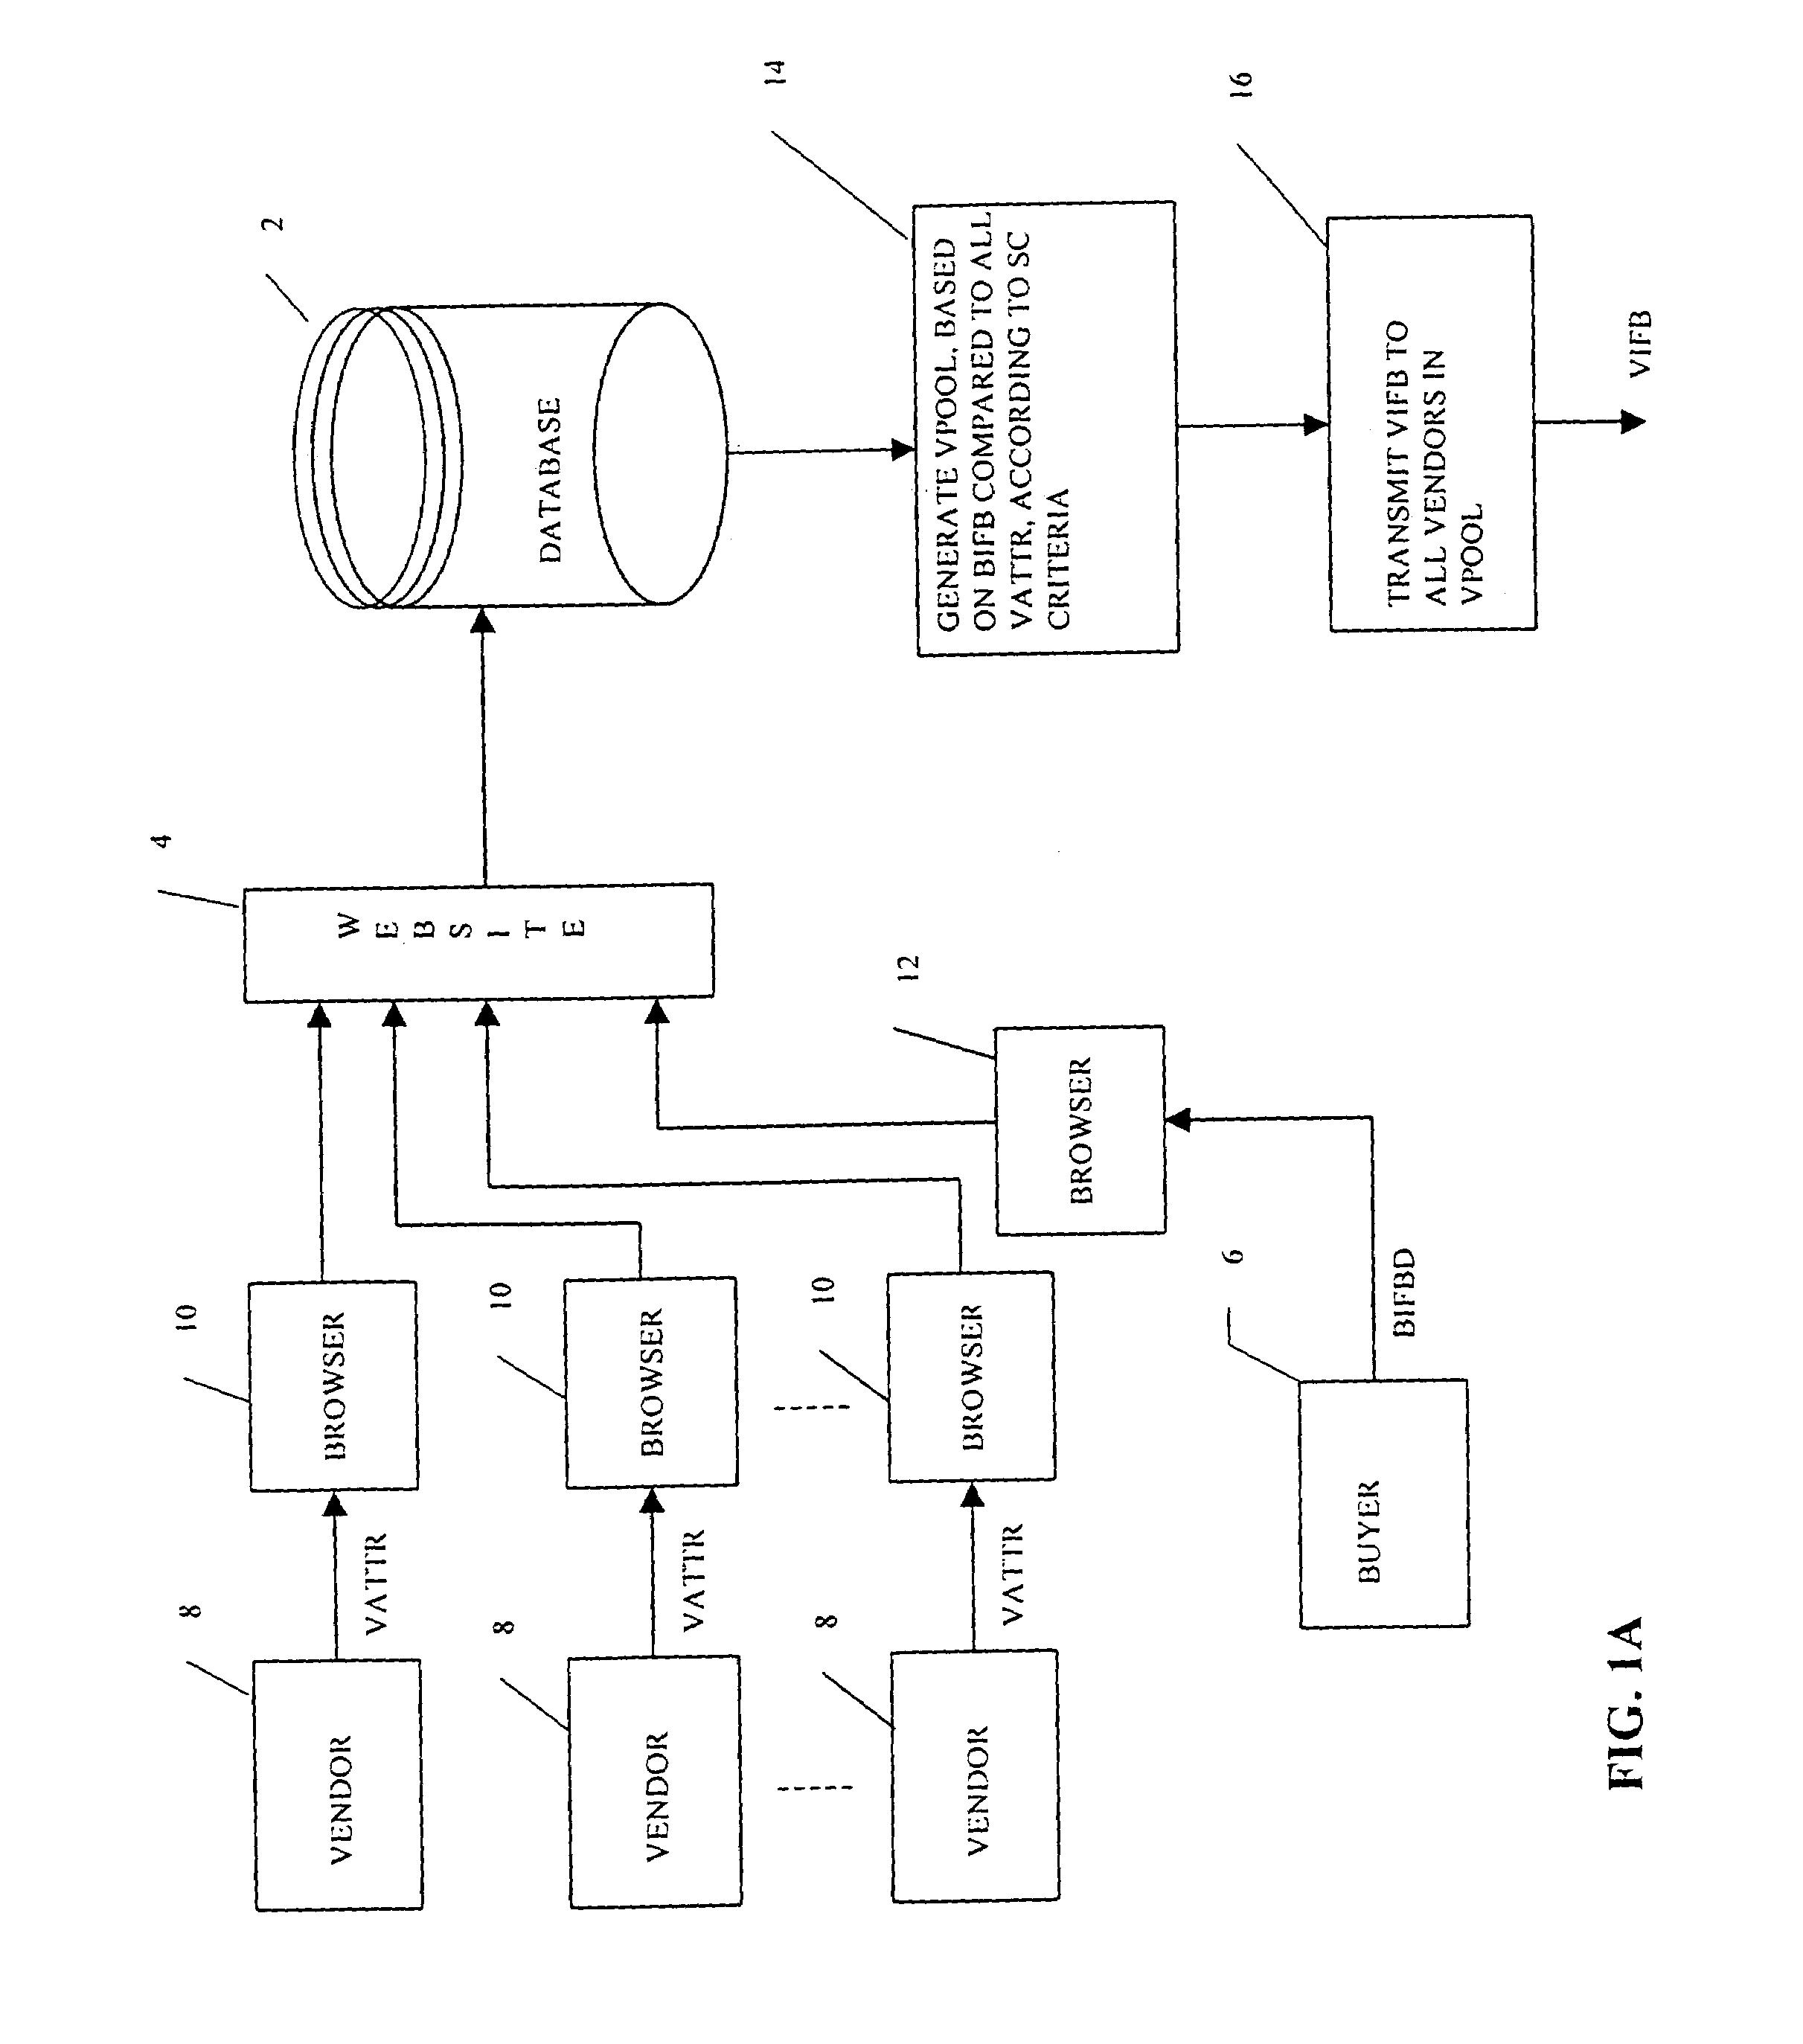 System and method for competitive pricing and procurement of customized goods and services